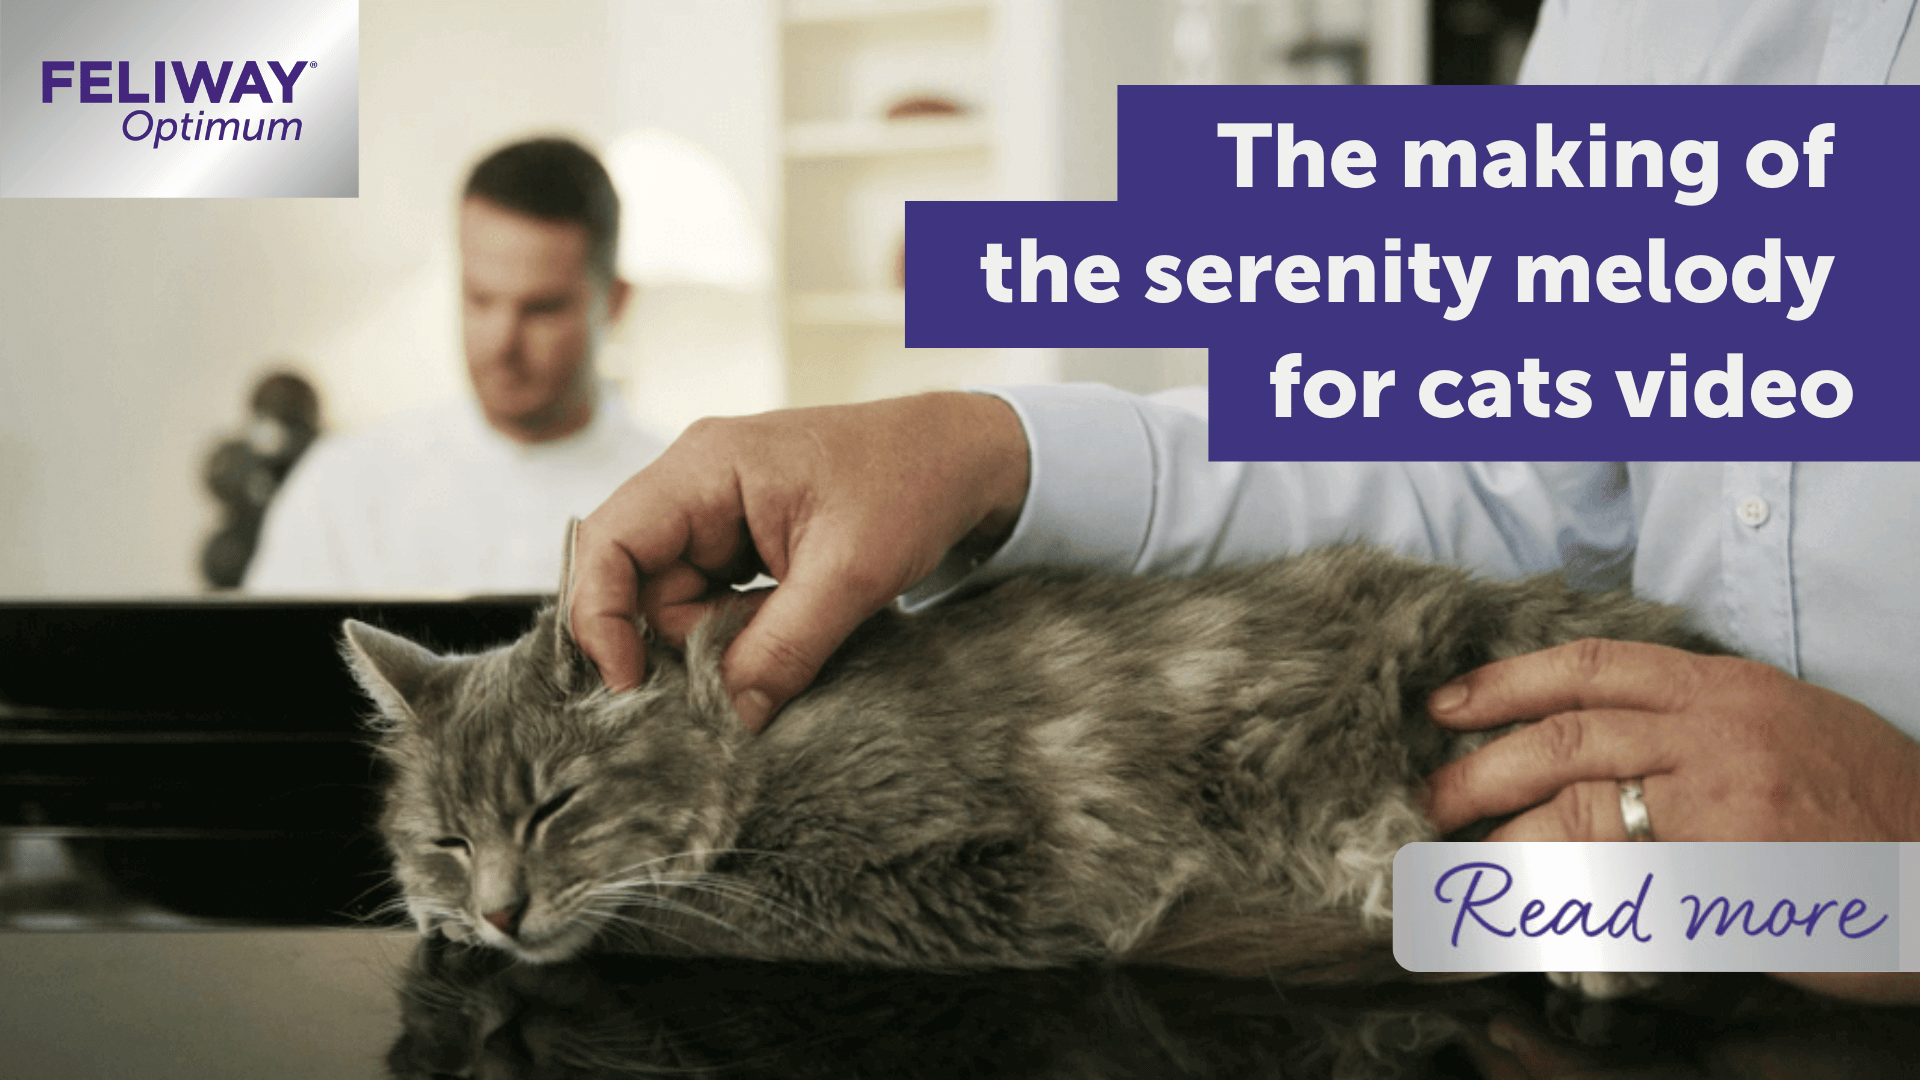 The making of the FELIWAY Optimum, the serenity melody for cats video